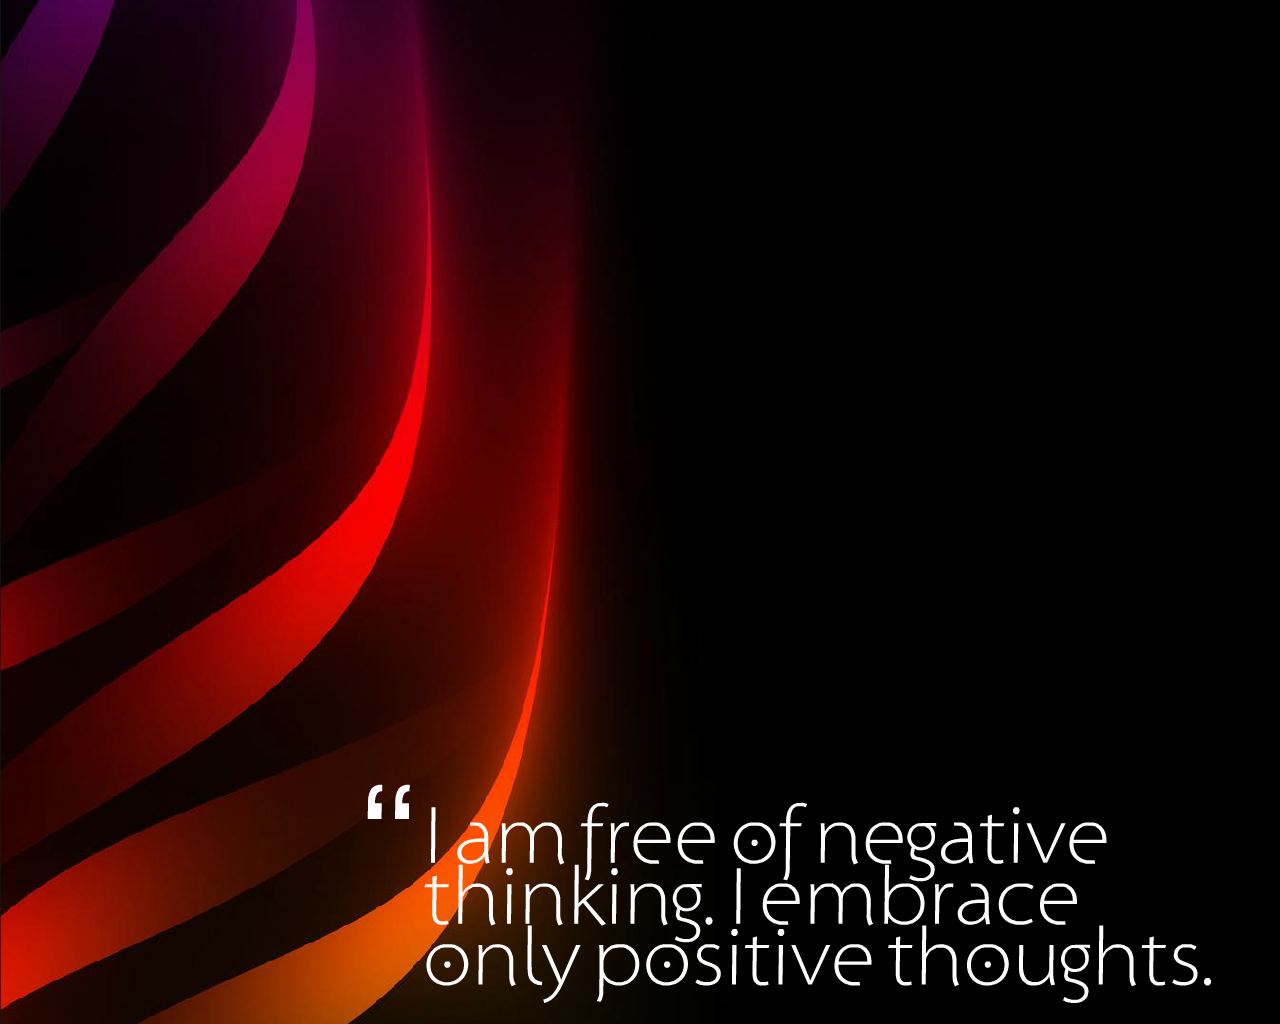 March 2014 Positive Affirmations Wallpapers, Positive Affirmations Wallpapers, Affirmations Wallpapers